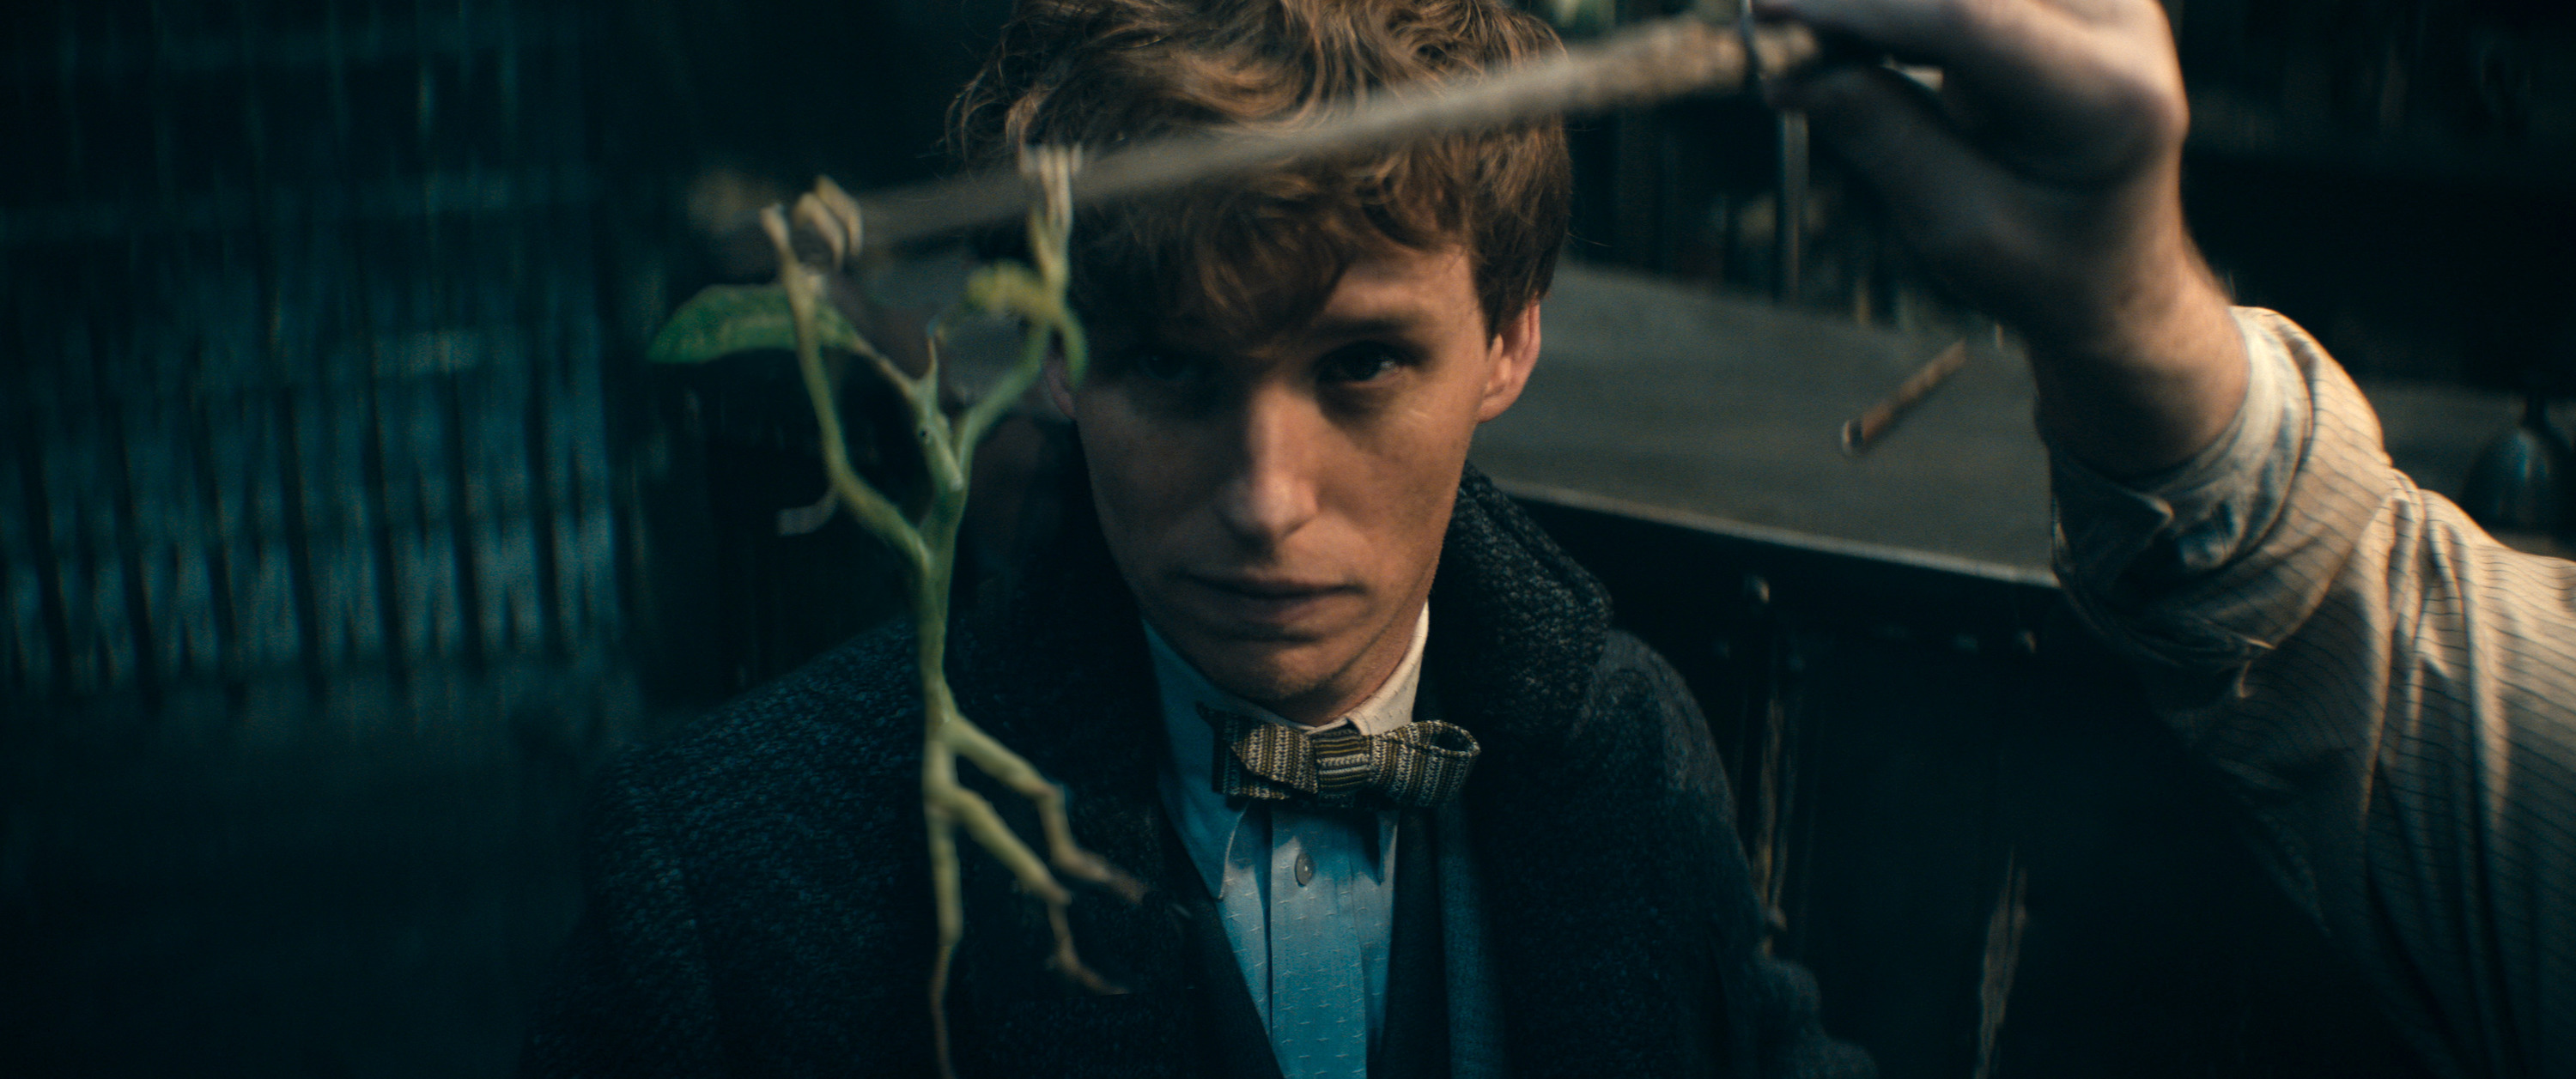 Newt Scamander (Eddie Redmayne) looks at “Pickett the Bowtruckle” (a little green leafy CGI beastie hanging from a branch) in Fantastic Beasts: The Secrets of Dumbledore